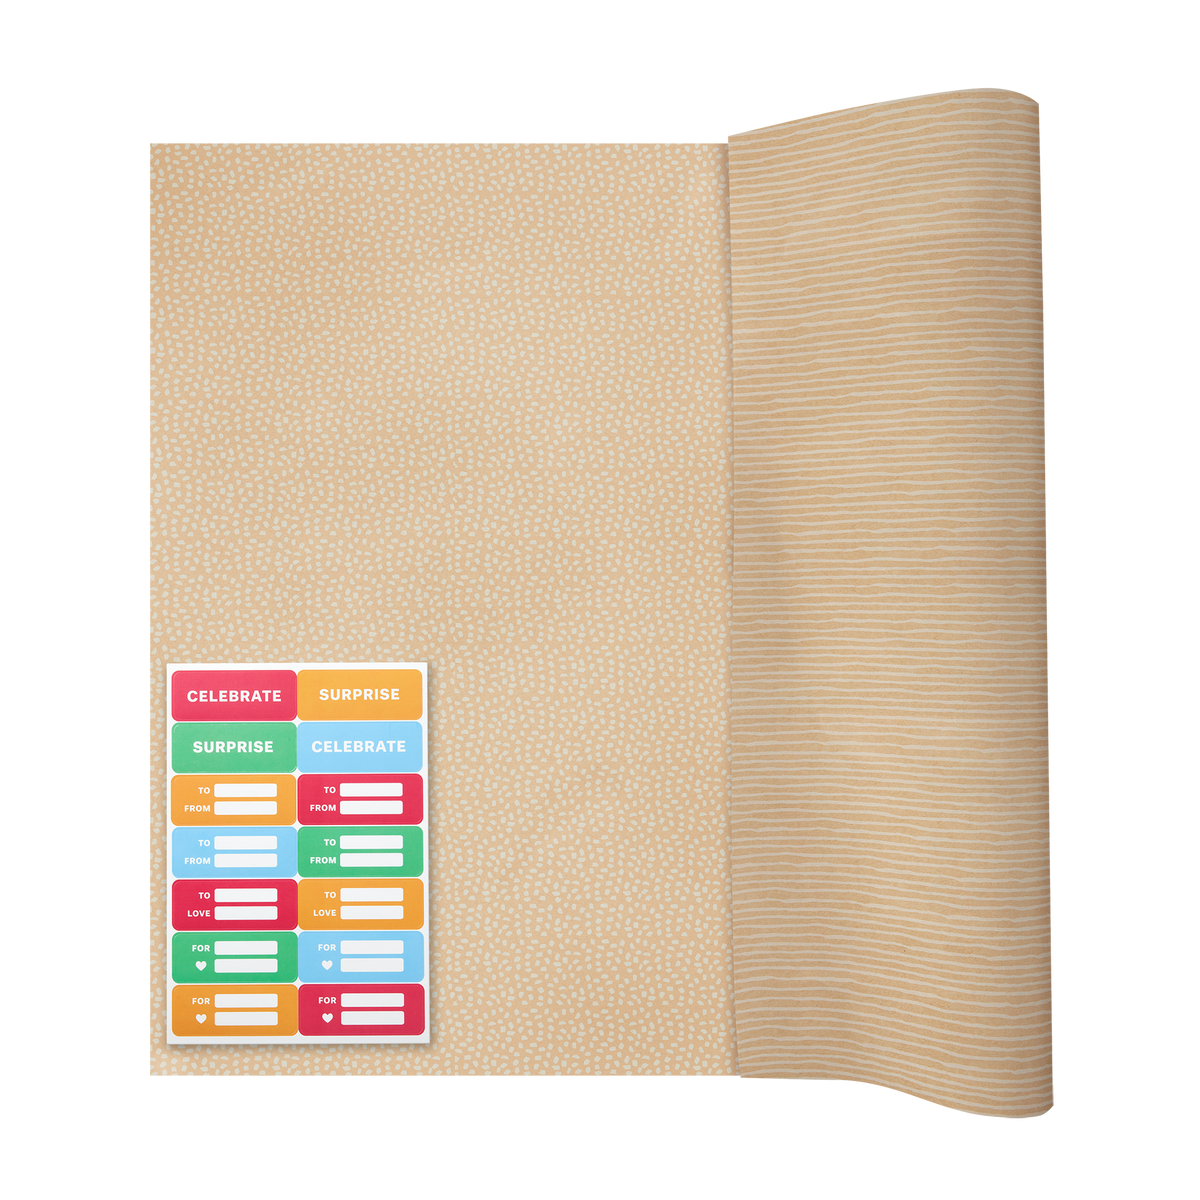 Front view, gift wrap paper and sticker set.  Stickers are various colors and include: celebrate, surprise, to/from, and for/heart icon.  Paper is brown with white dots or line printing in a lighthearted casual style.